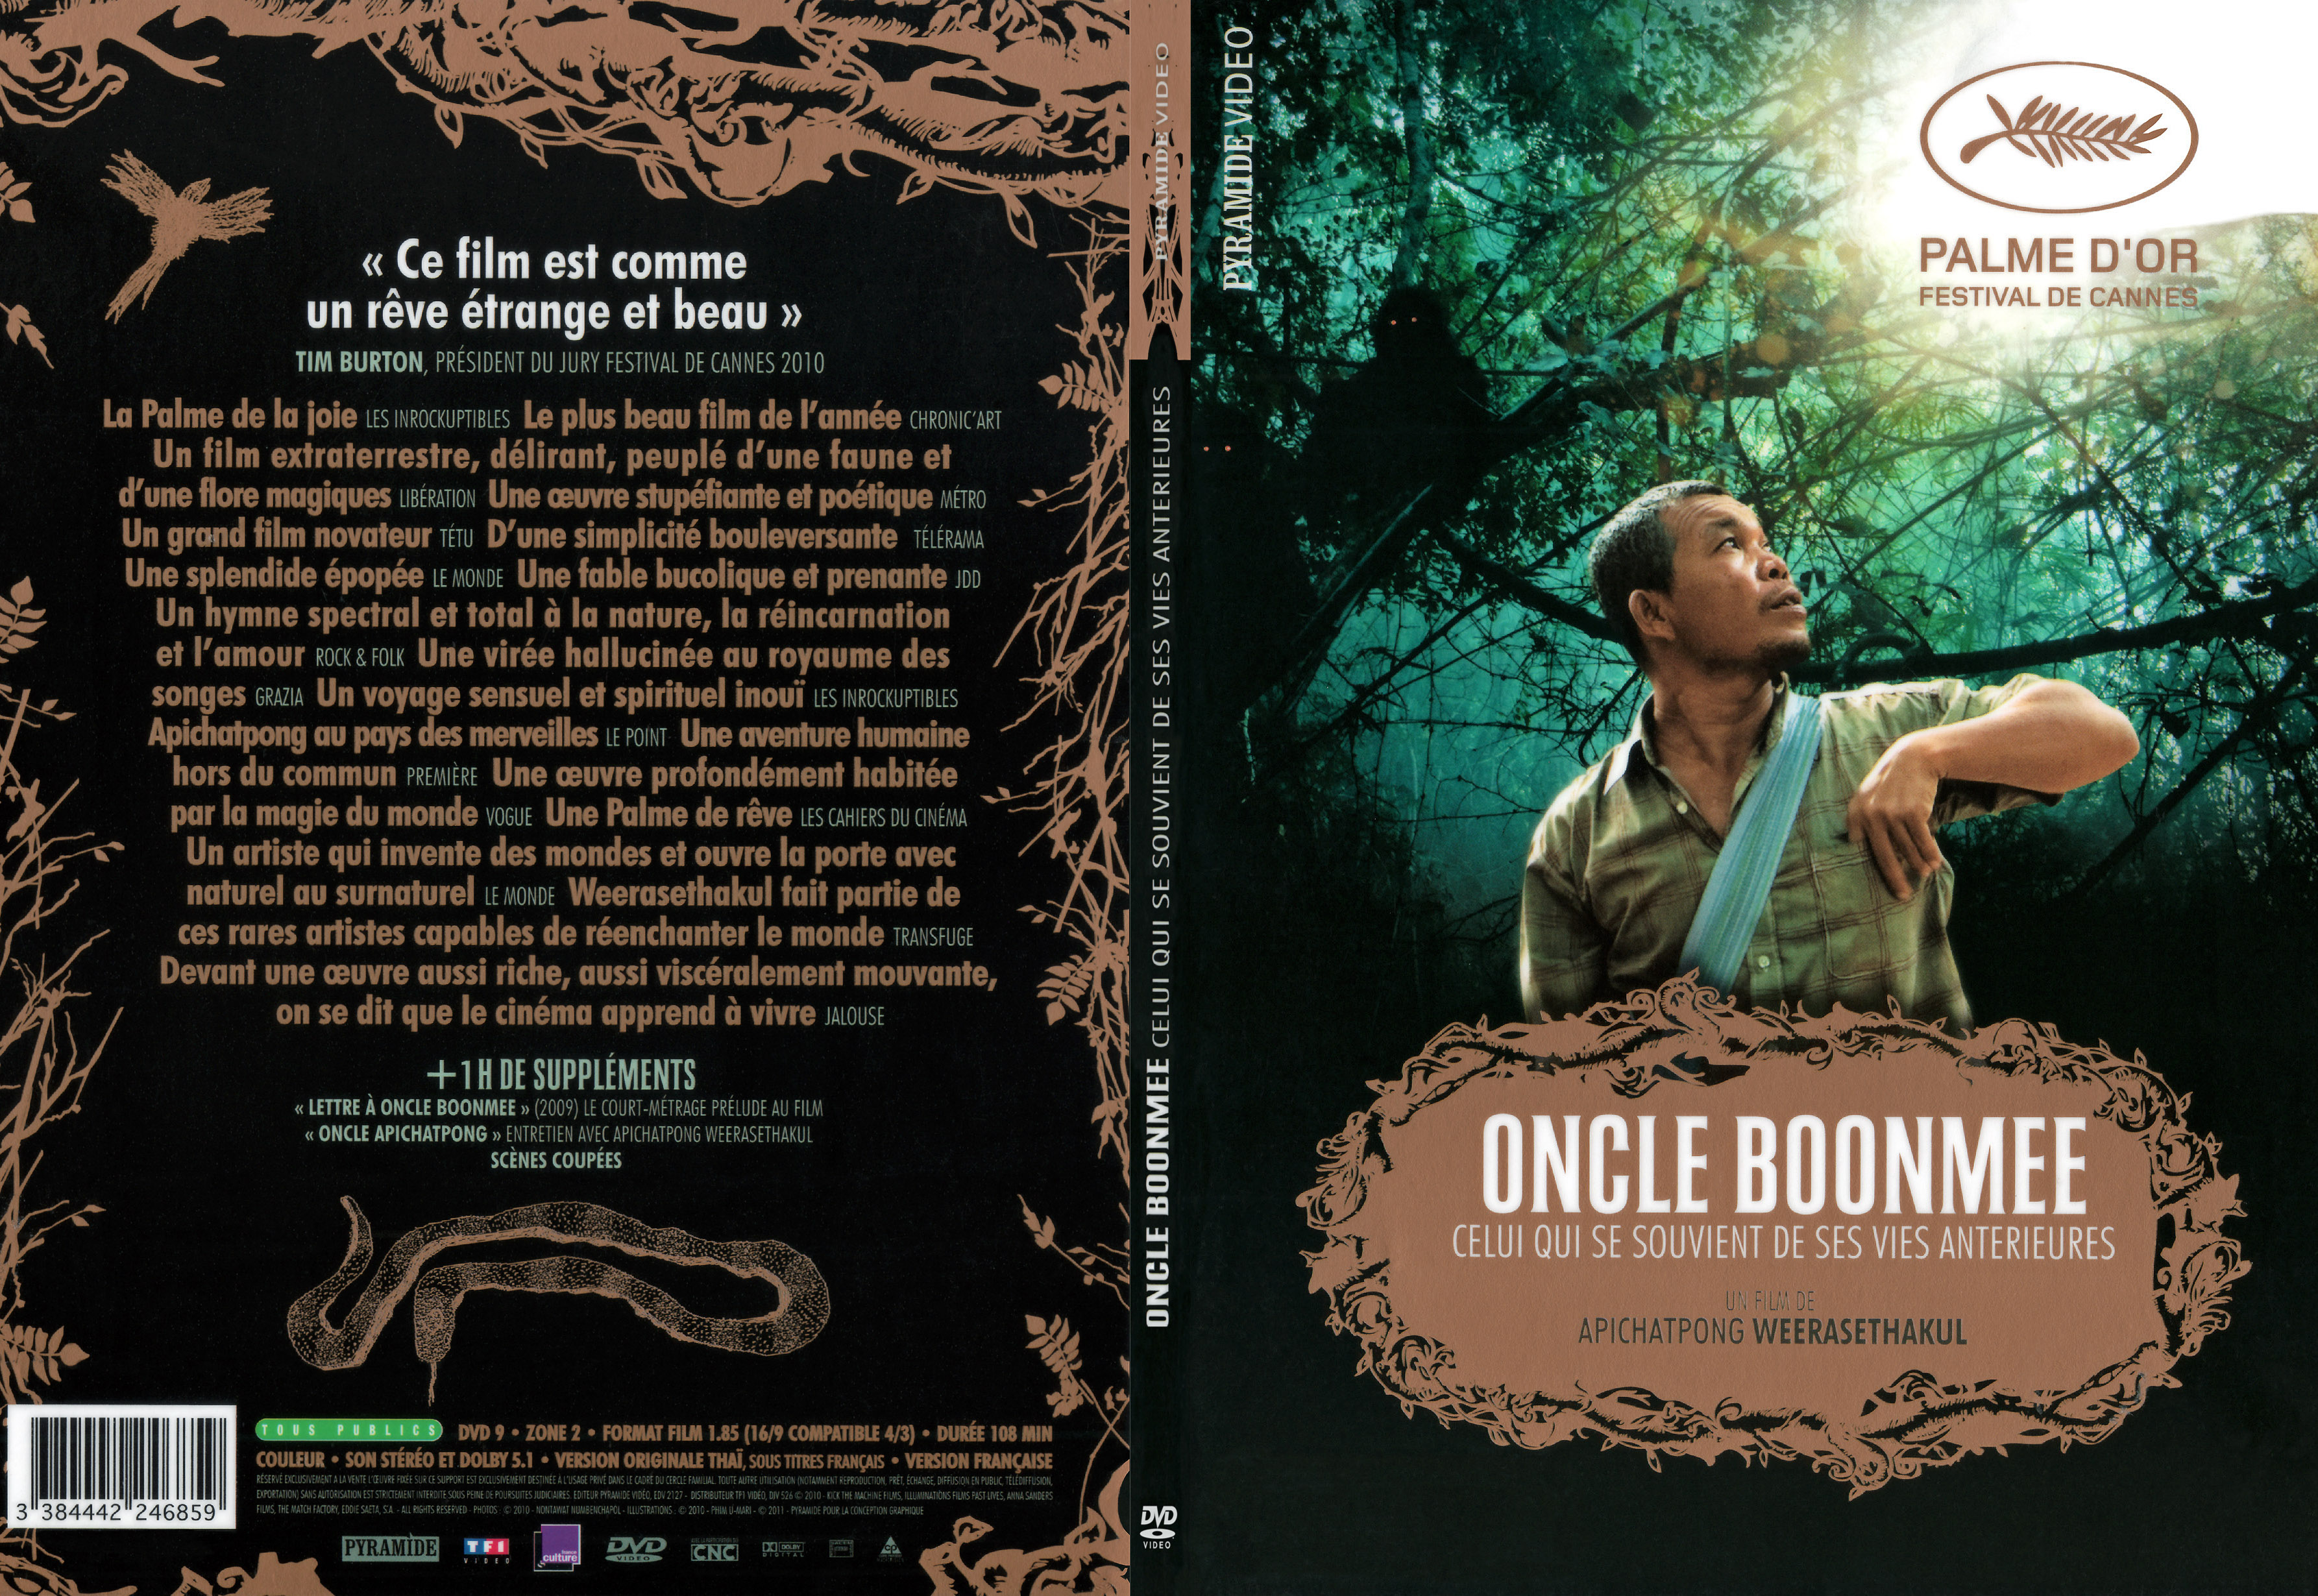 Jaquette DVD Oncle Boonmee - SLIM